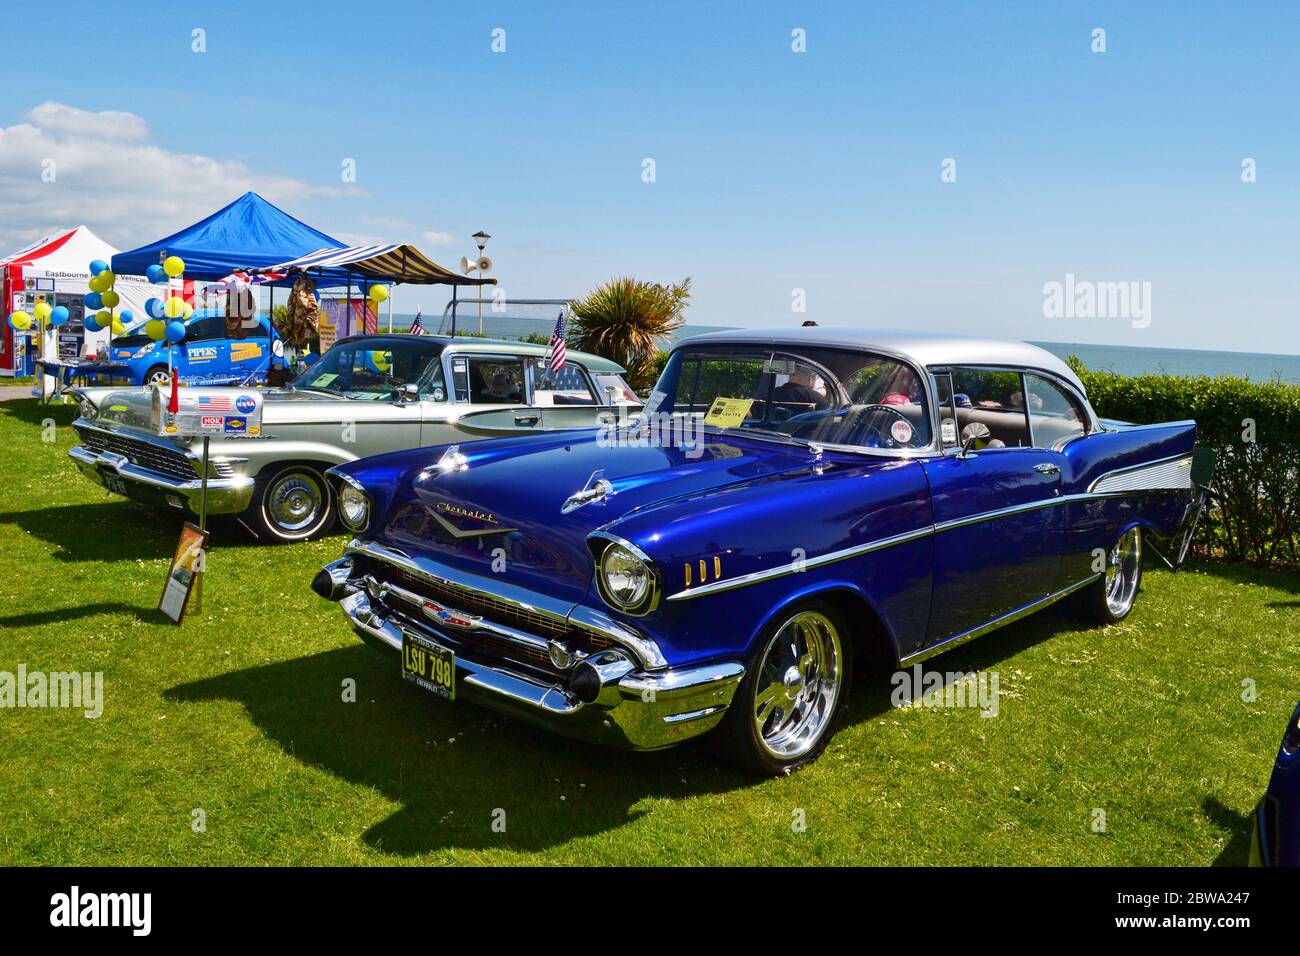 Magnificent Motors, an annual classic car and motoring event on Eastbourne Seafront, East Sussex, UK Stock Photo